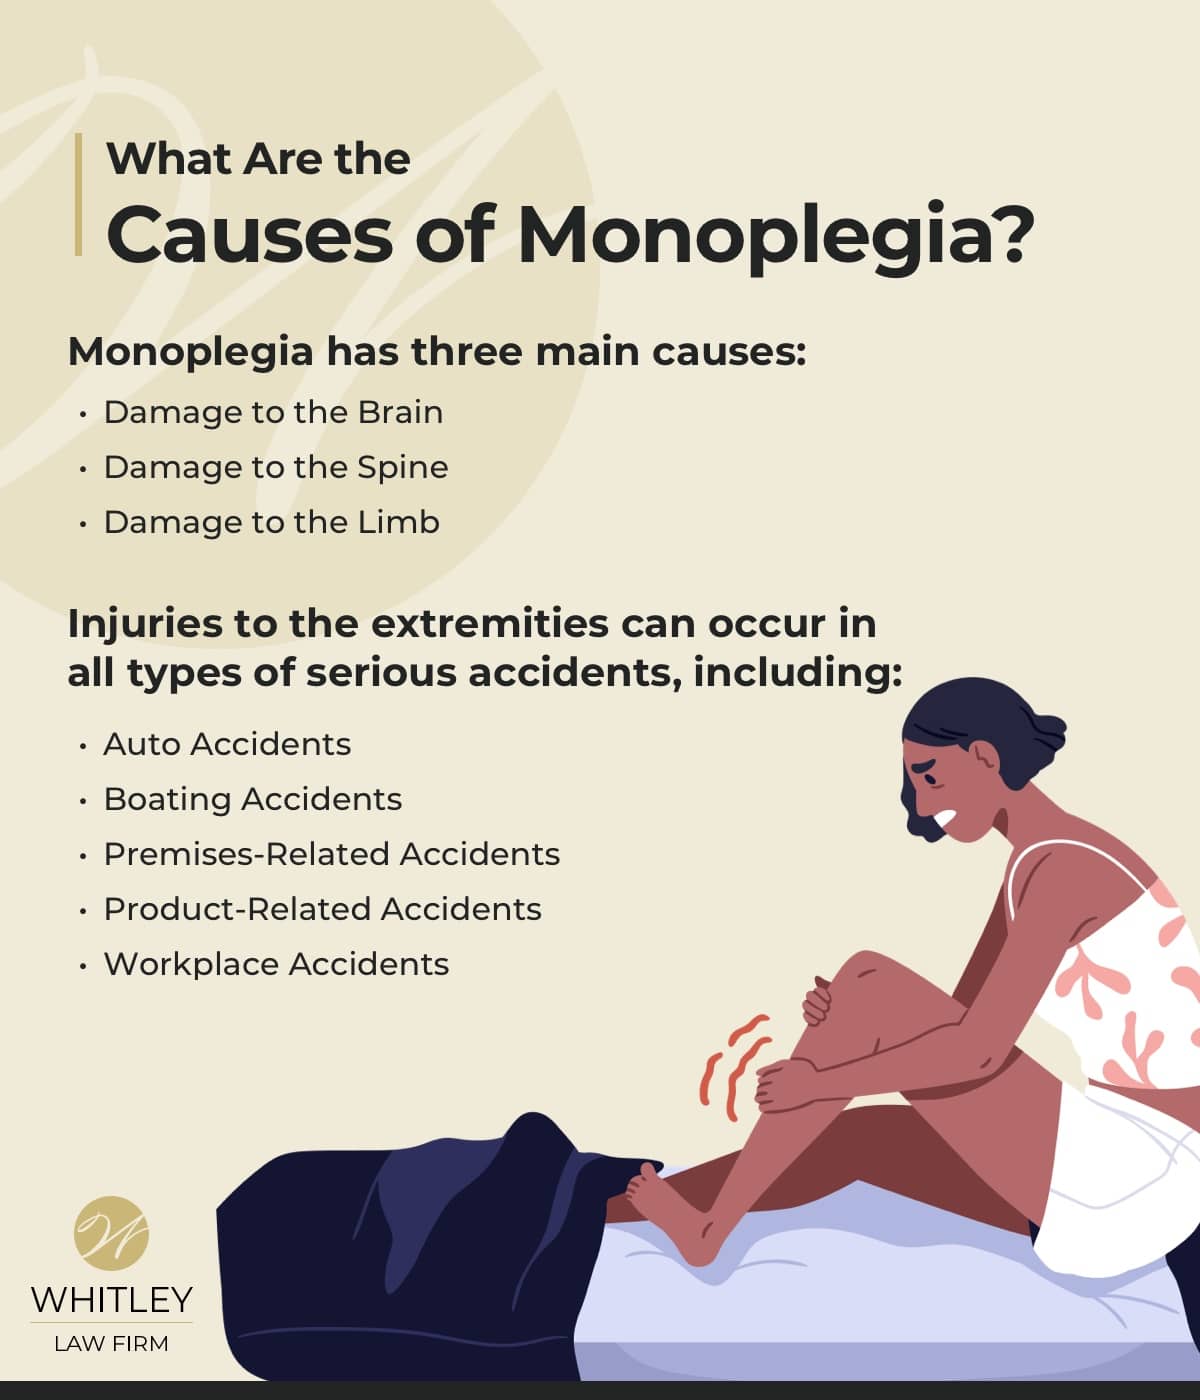 what are the causes of monoplegia?